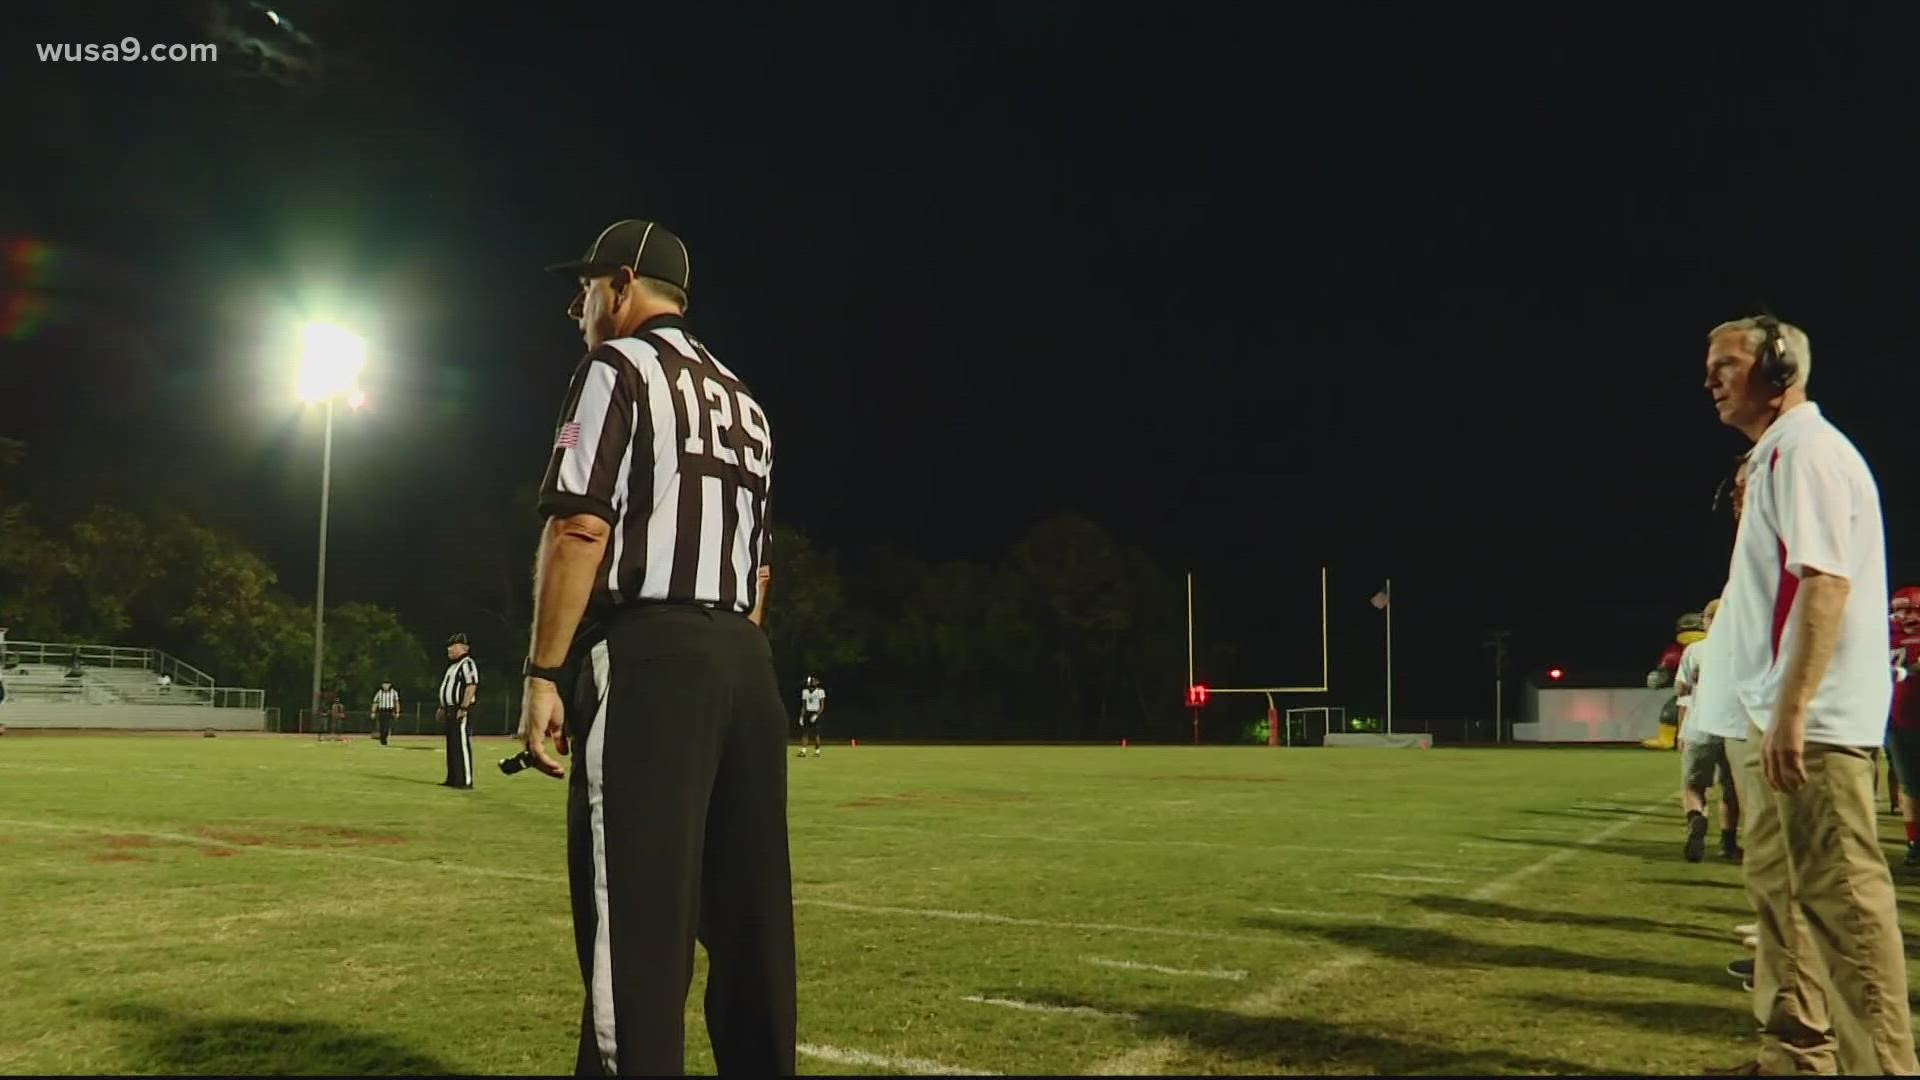 The Commissioner of the Northern Virginia Football Officials Association said some games may have to be played on Thursday or Saturday.